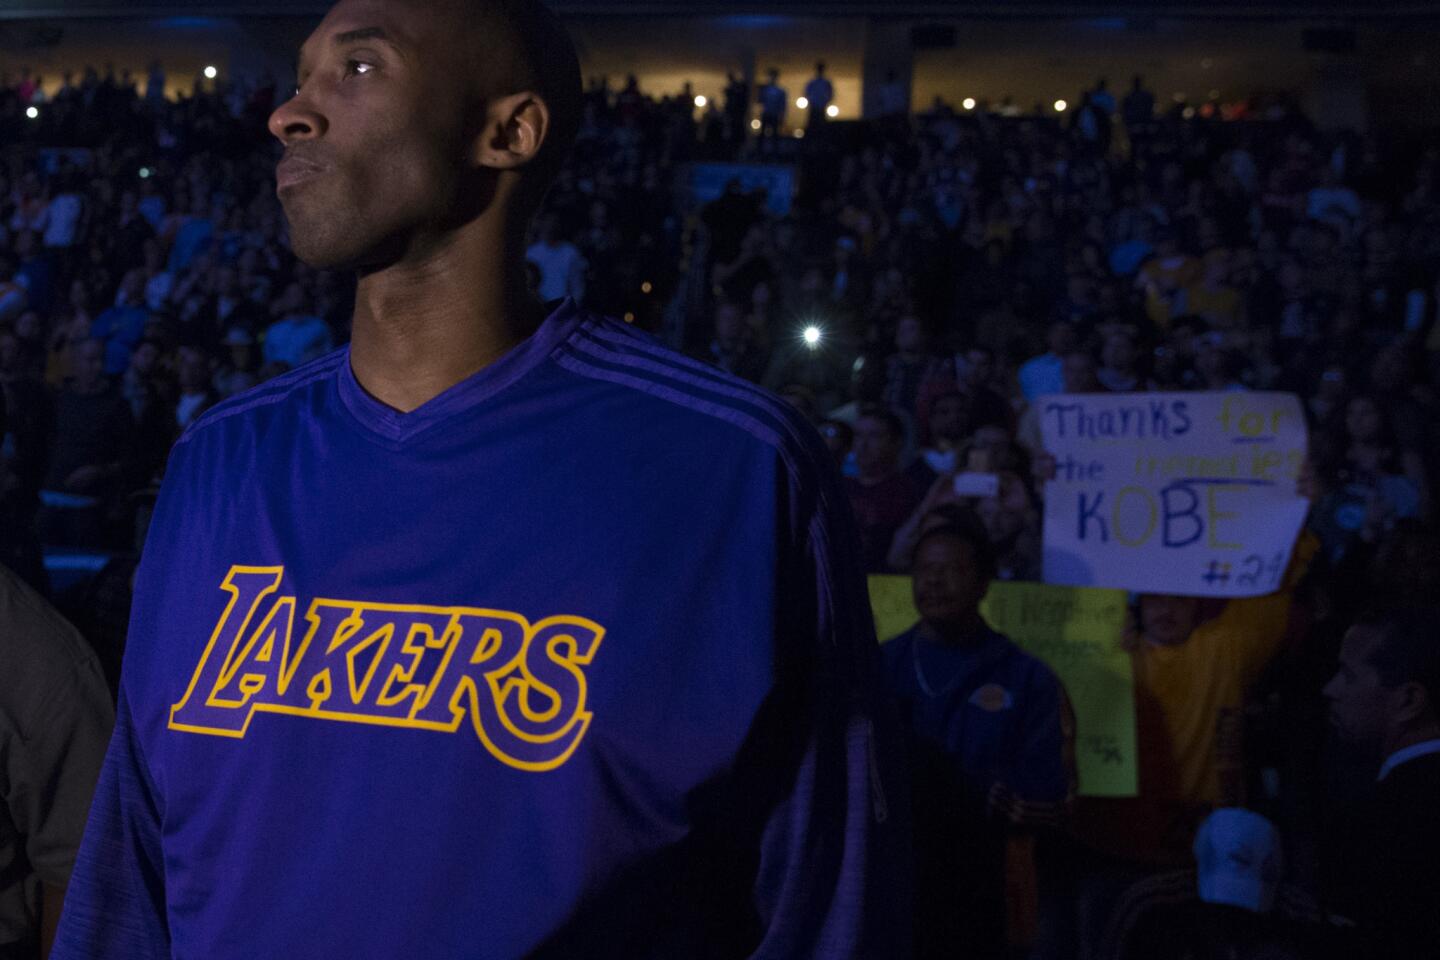 Celtics fans bid farewell to Kobe Bryant with cheers and boos